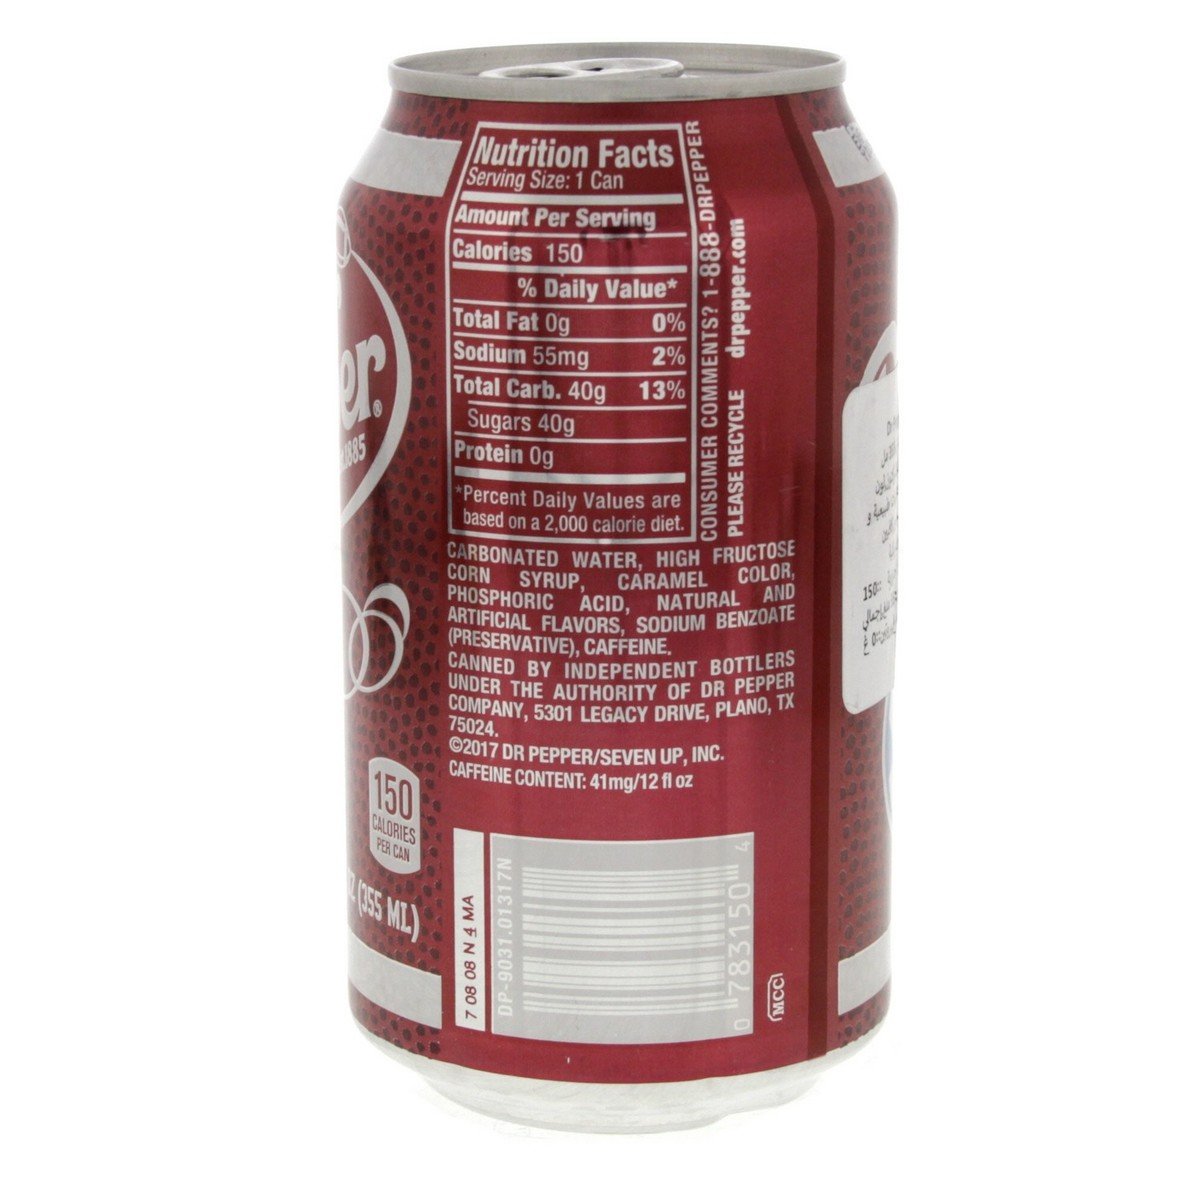 Dr Pepper Authentic Blend of 23 Flavors Cola 355 ml